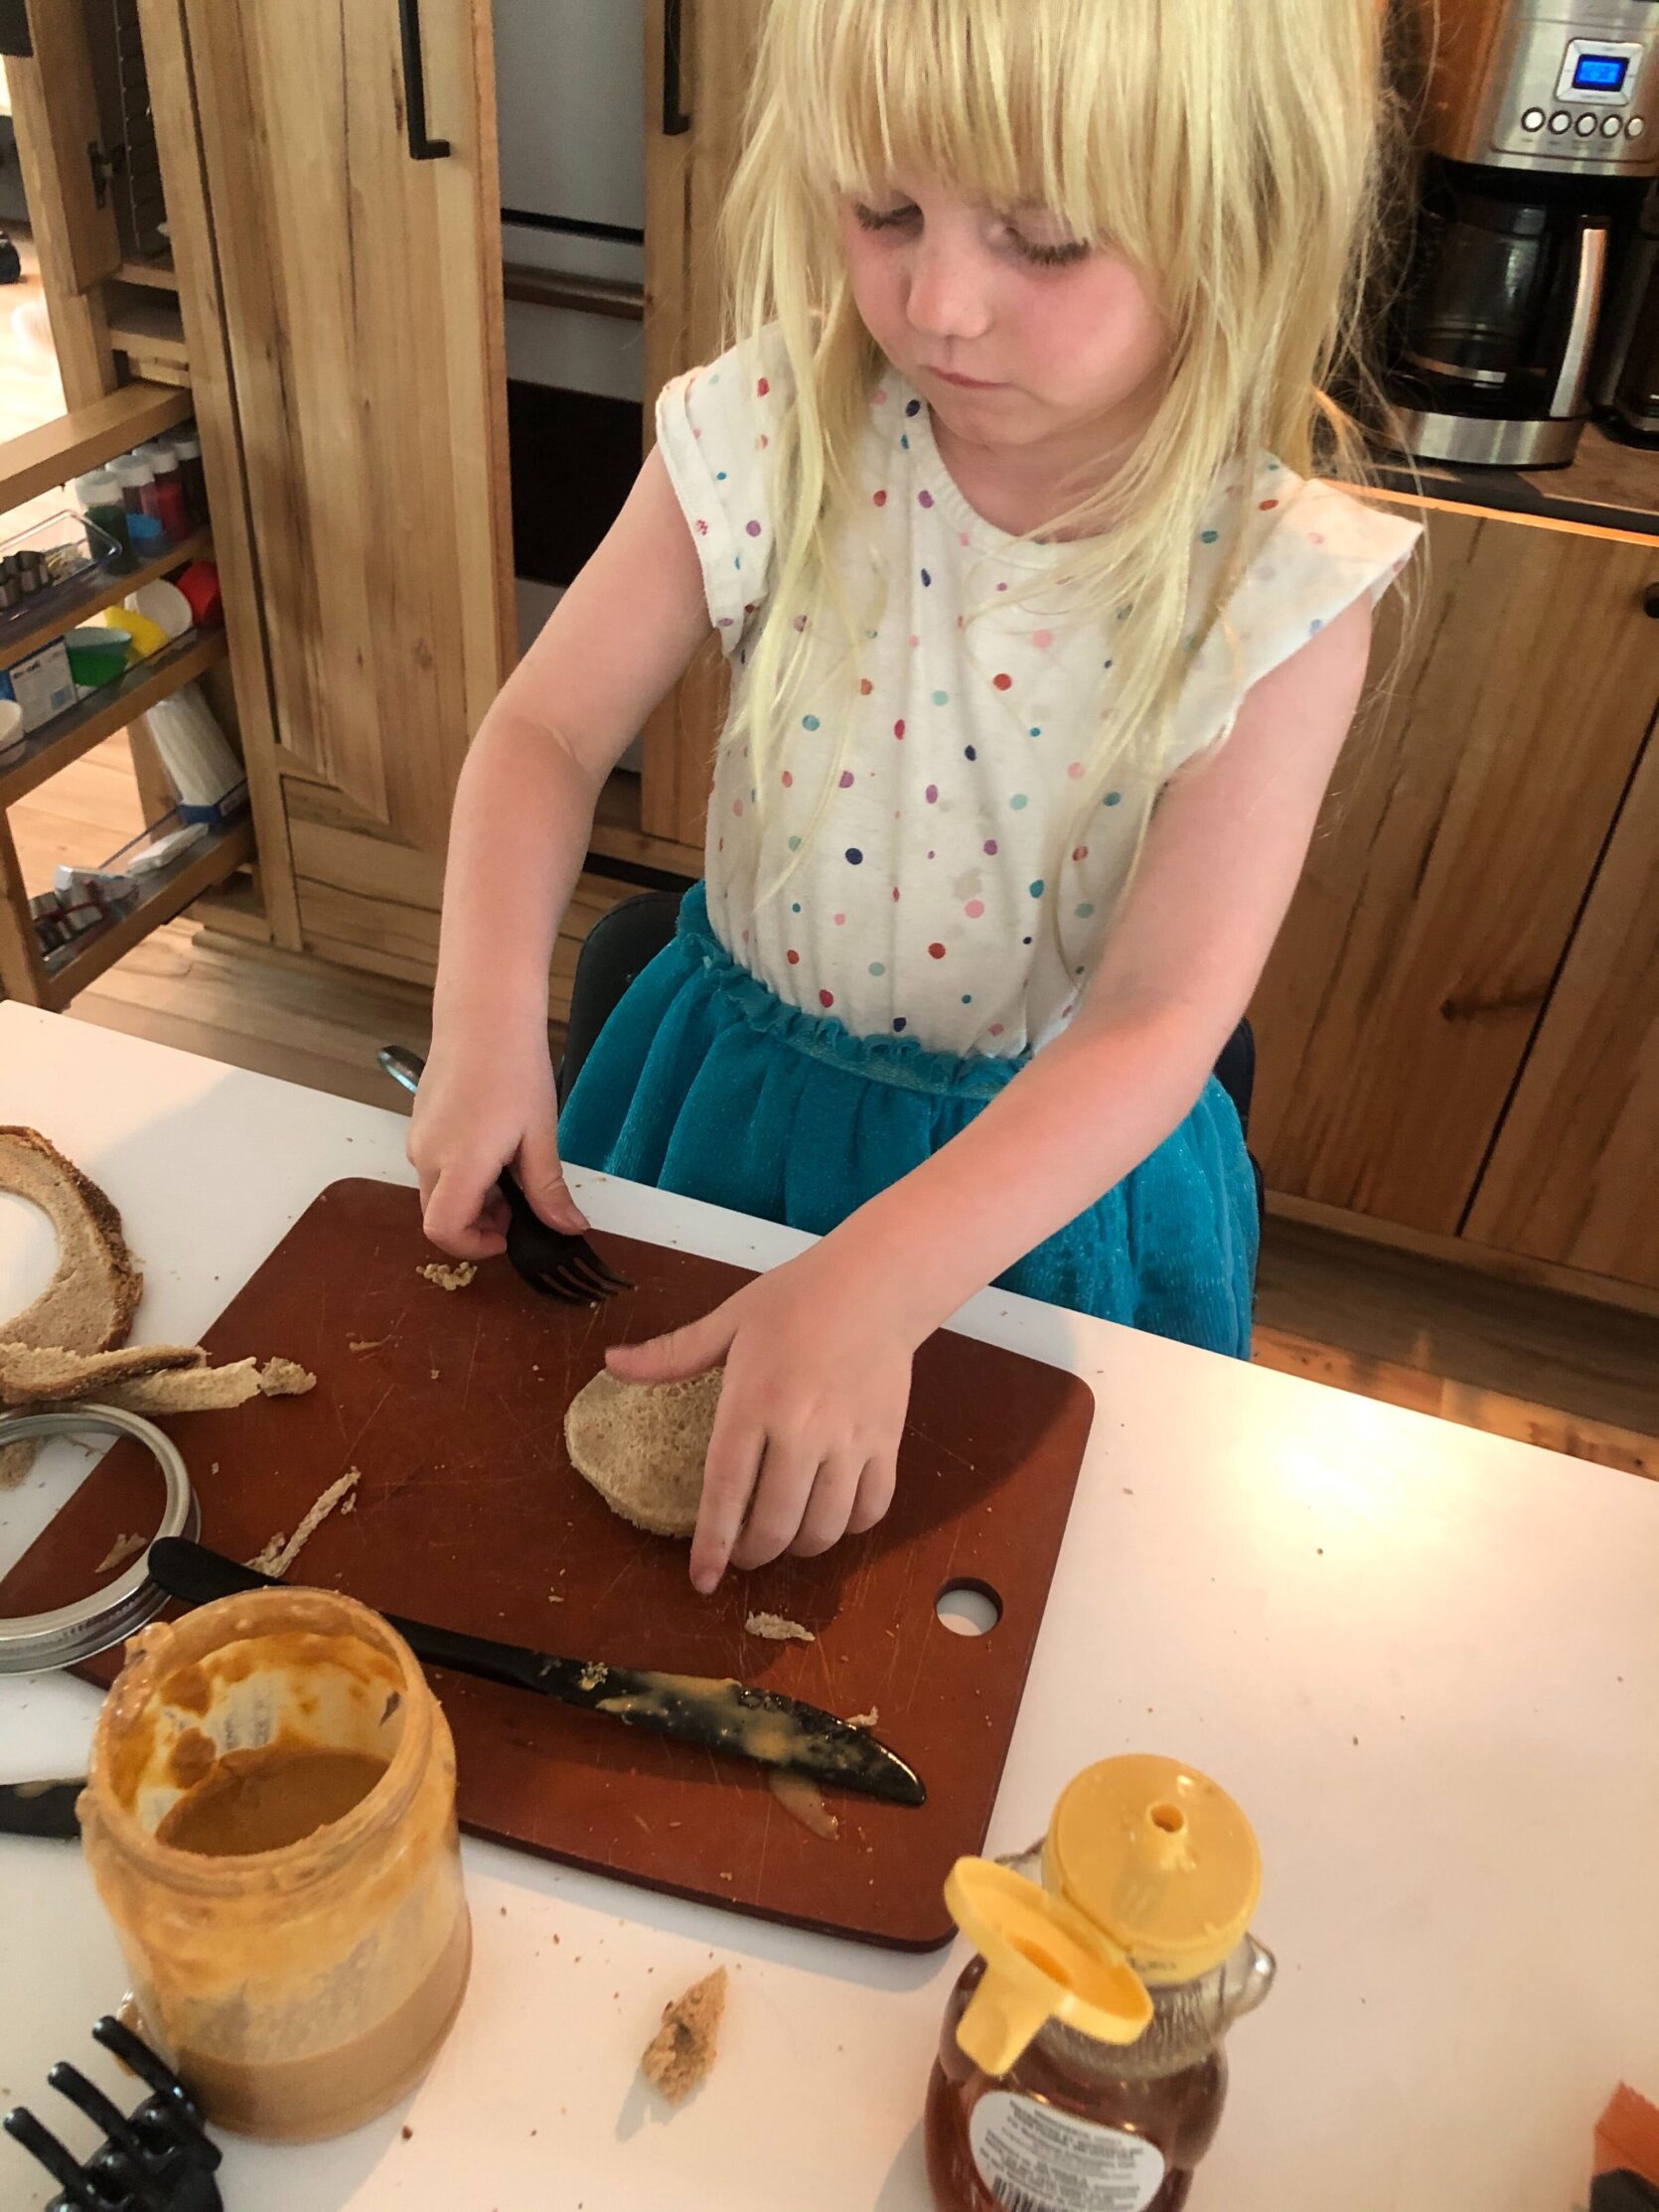 Cooking School With The Kids ... And A Surprising Parenting Hack Discovered